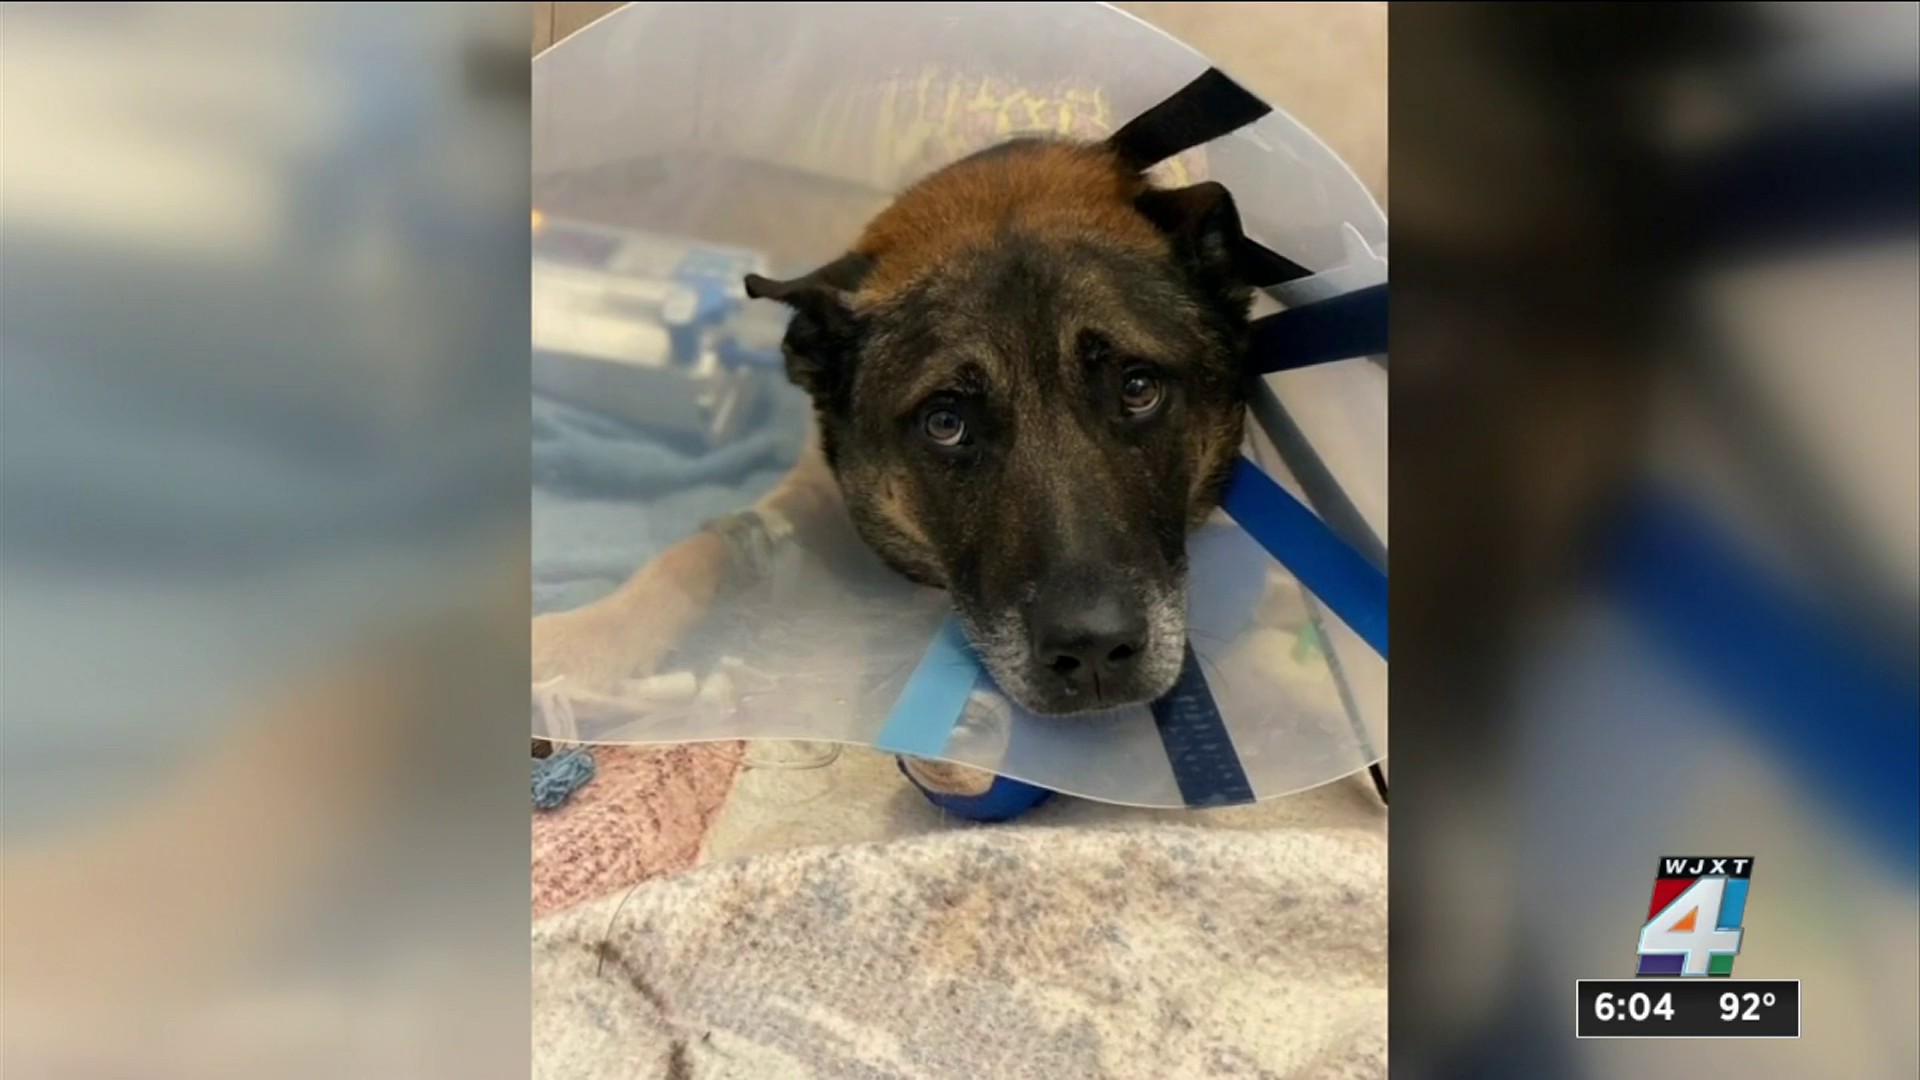 Vet tech's dog donates blood to save K-9's life after shooting